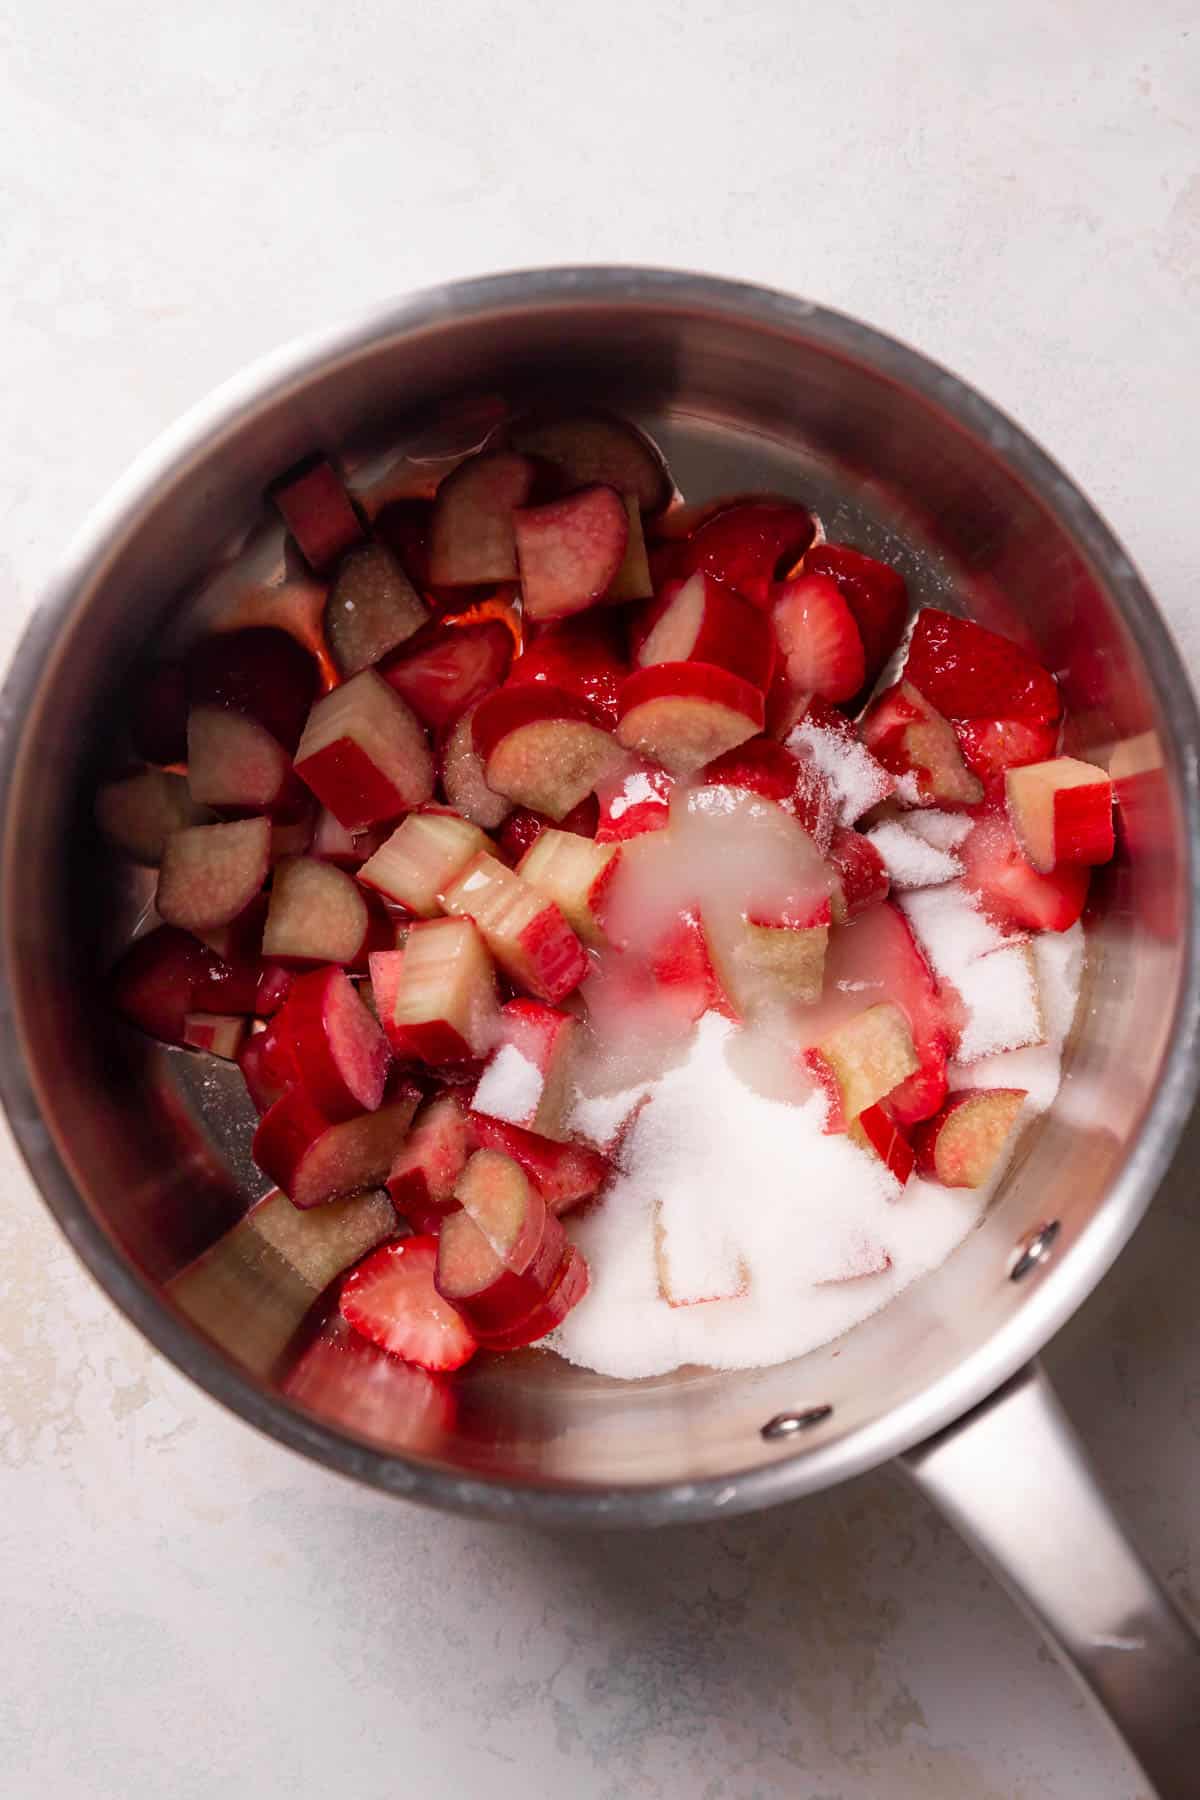 strawberries and rhubarb in a pot with sugar.